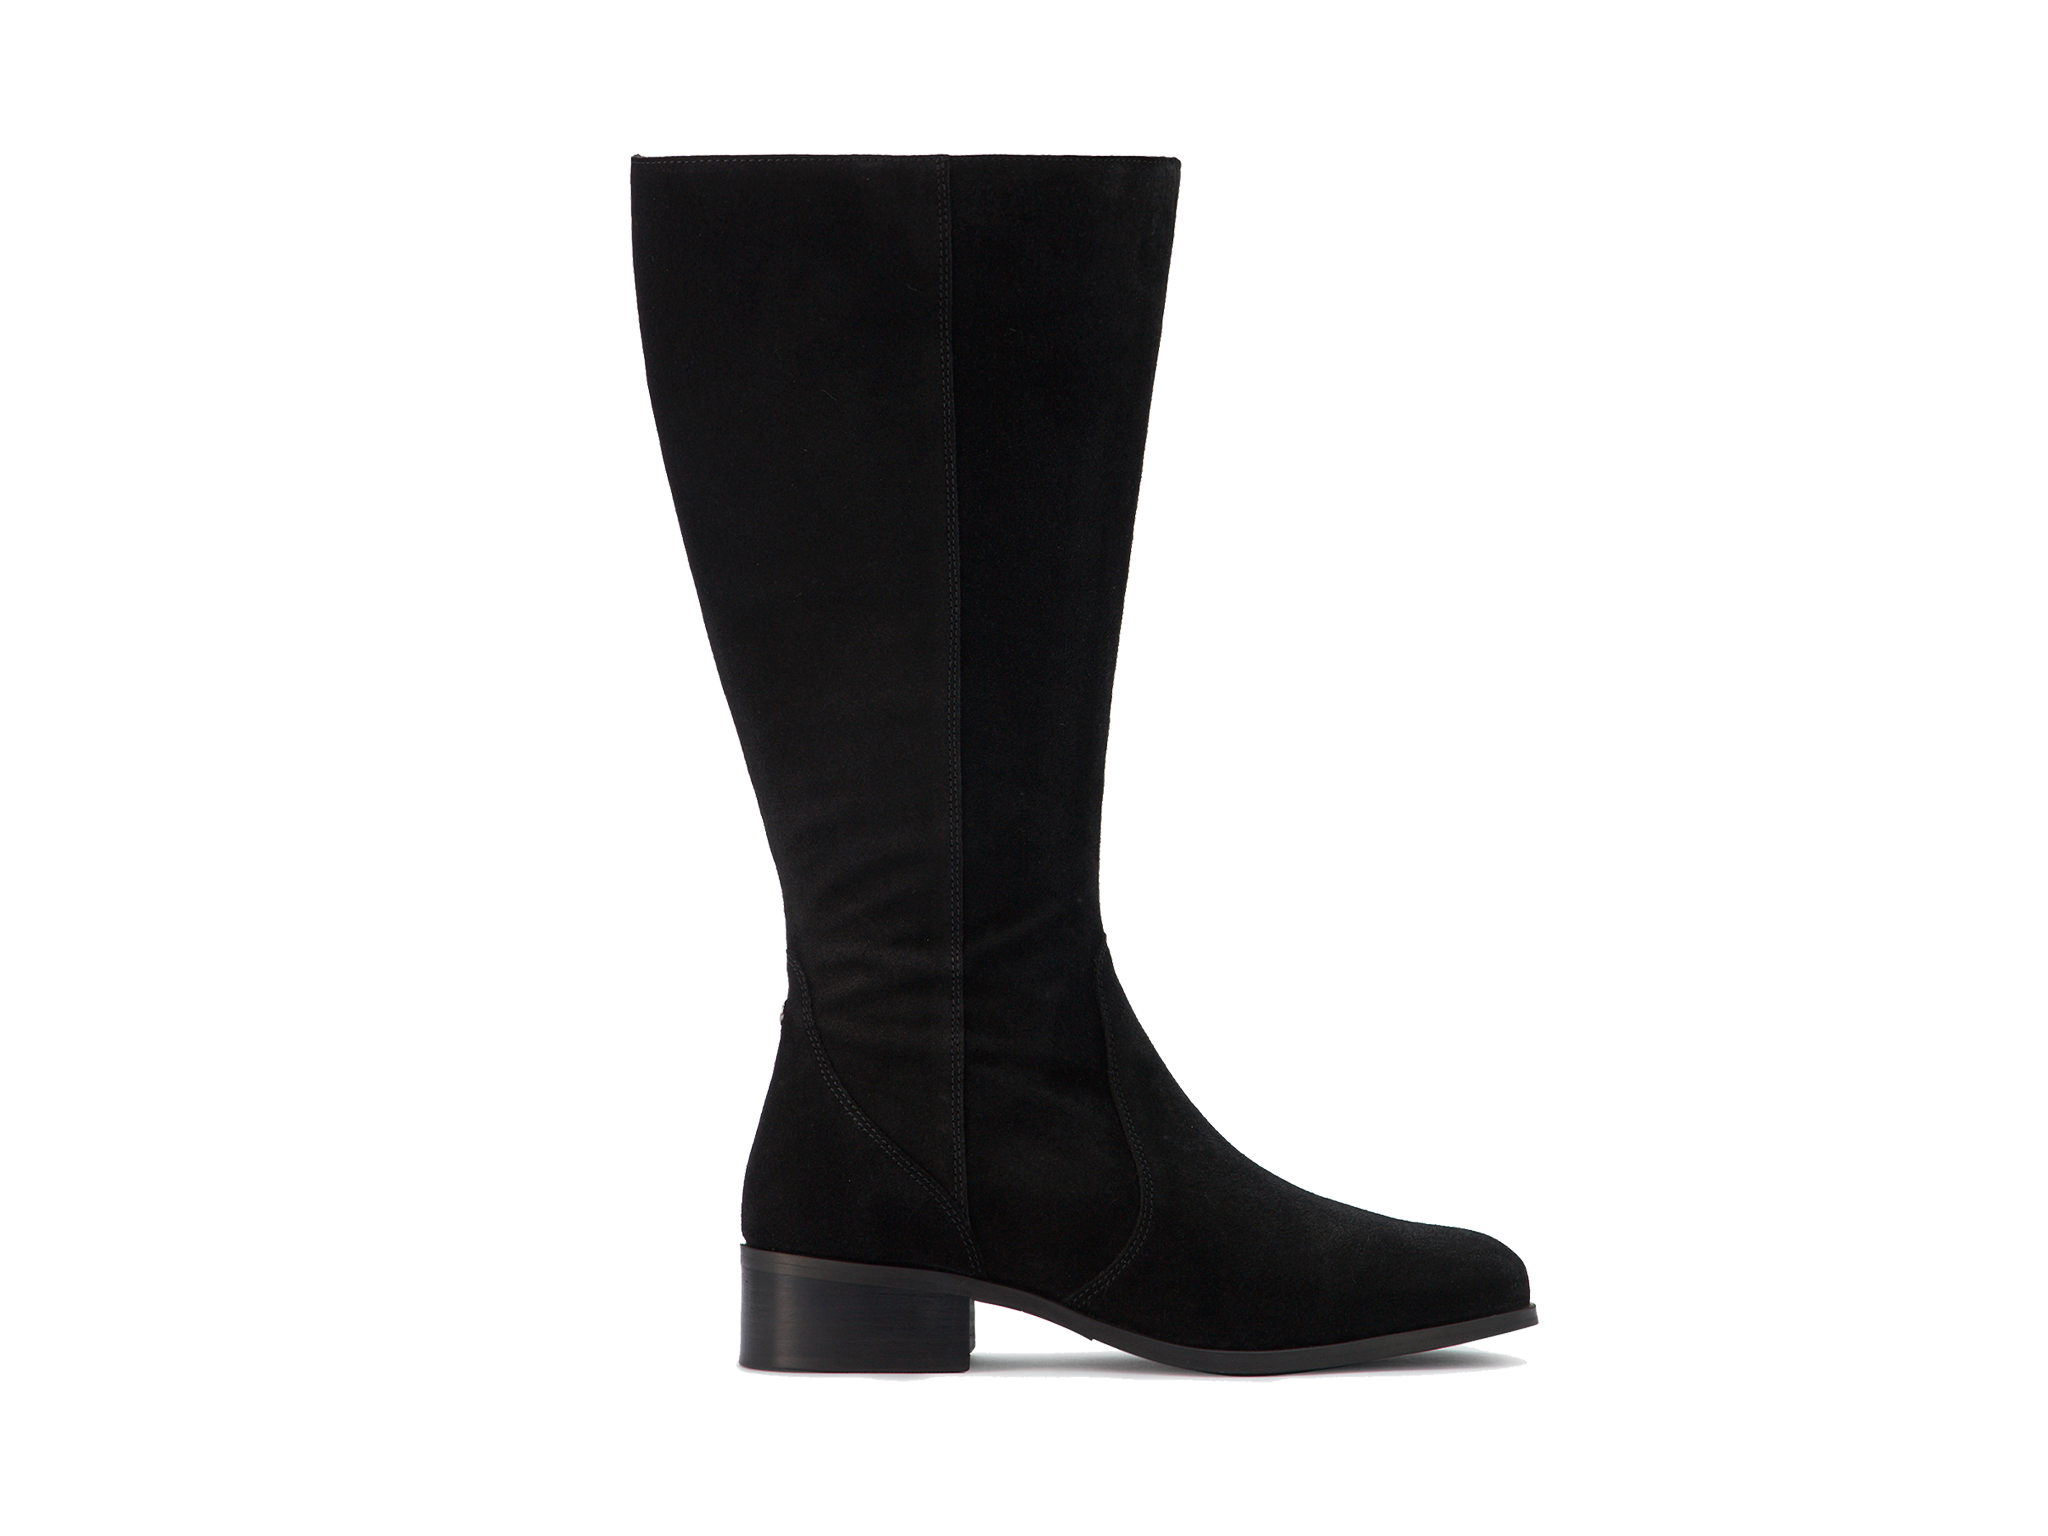 Duo Boots haltham standard knee high boots in black suede